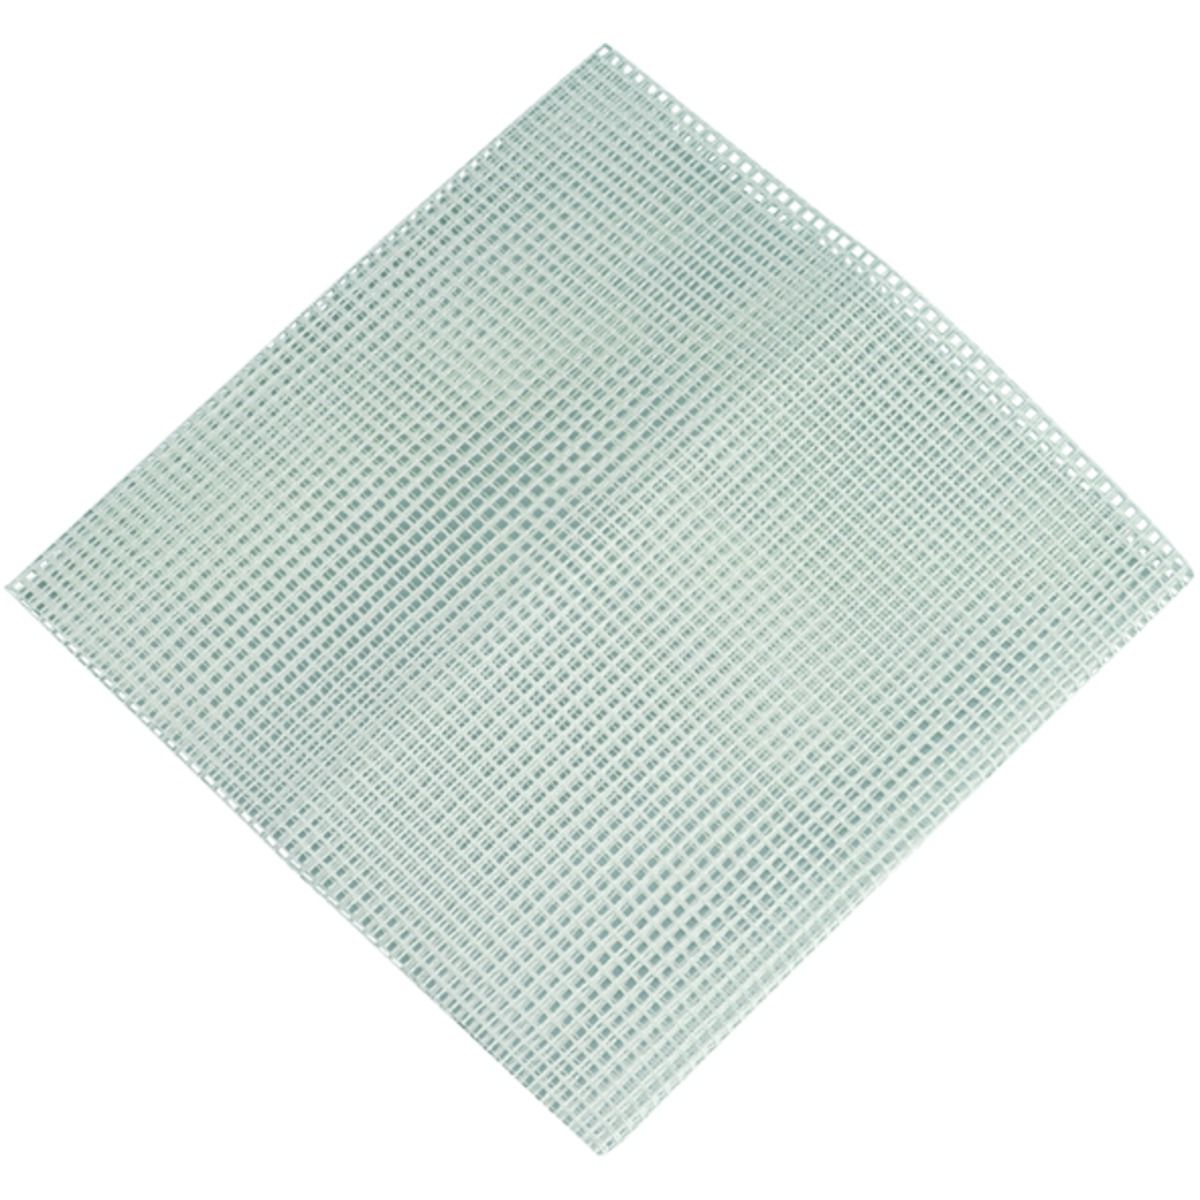 Image of Wickes Patch & Repair Mesh - 1m x 250mm